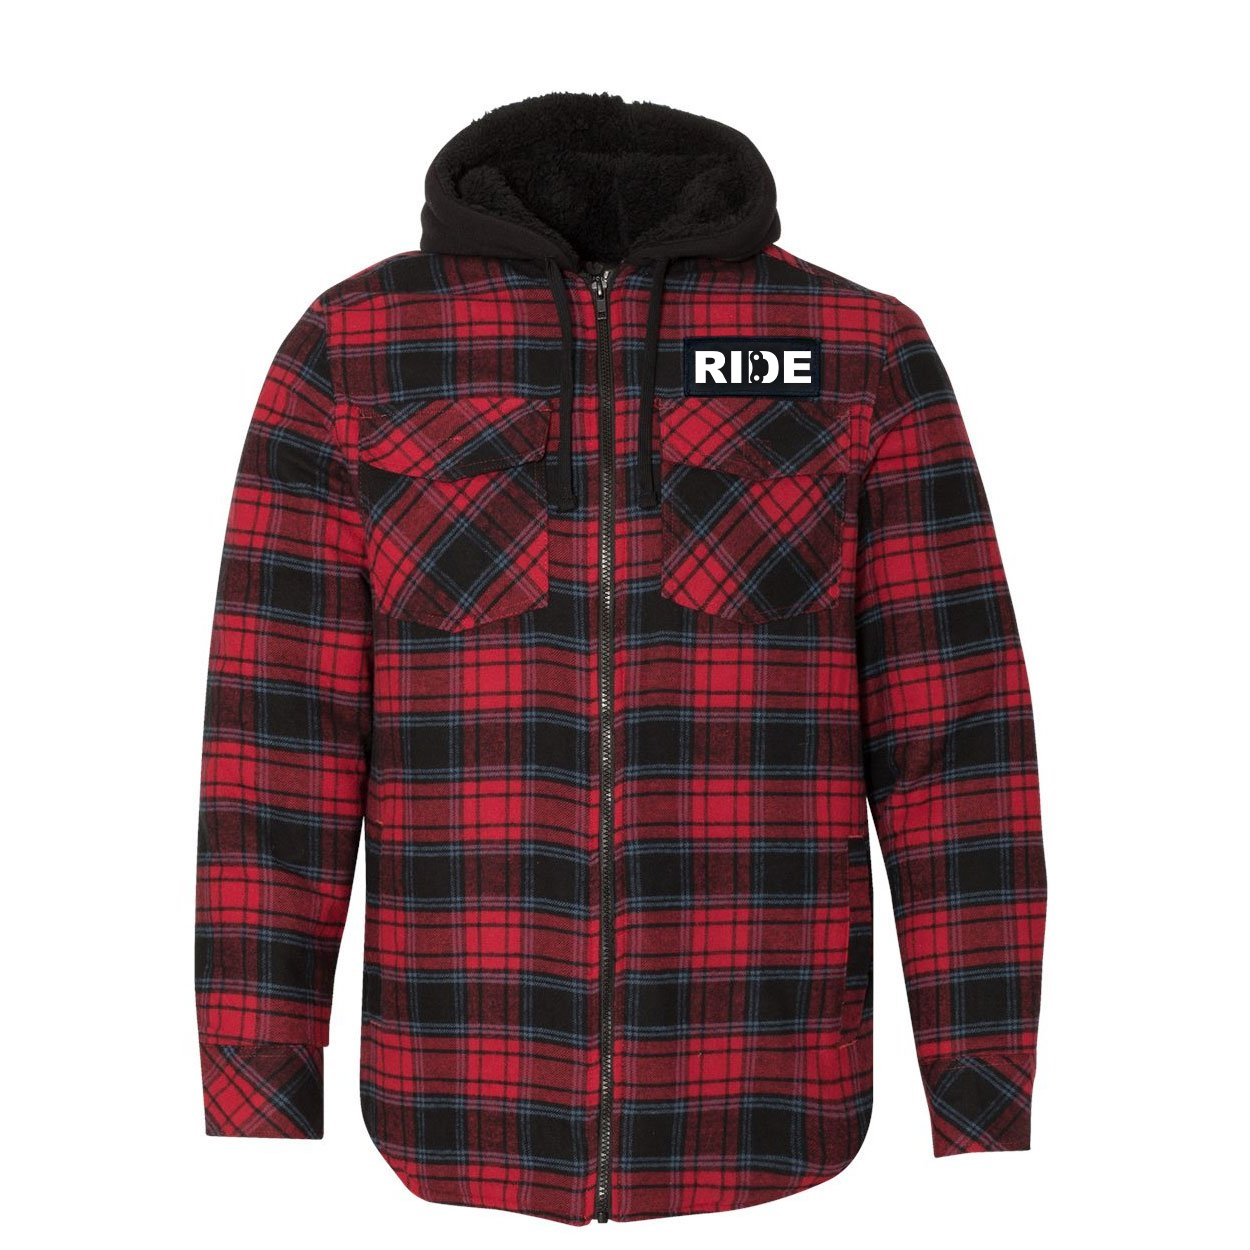 Ride Chain Logo Classic Unisex Full Zip Woven Patch Hooded Flannel Jacket Red/Black Buffalo (White Logo)